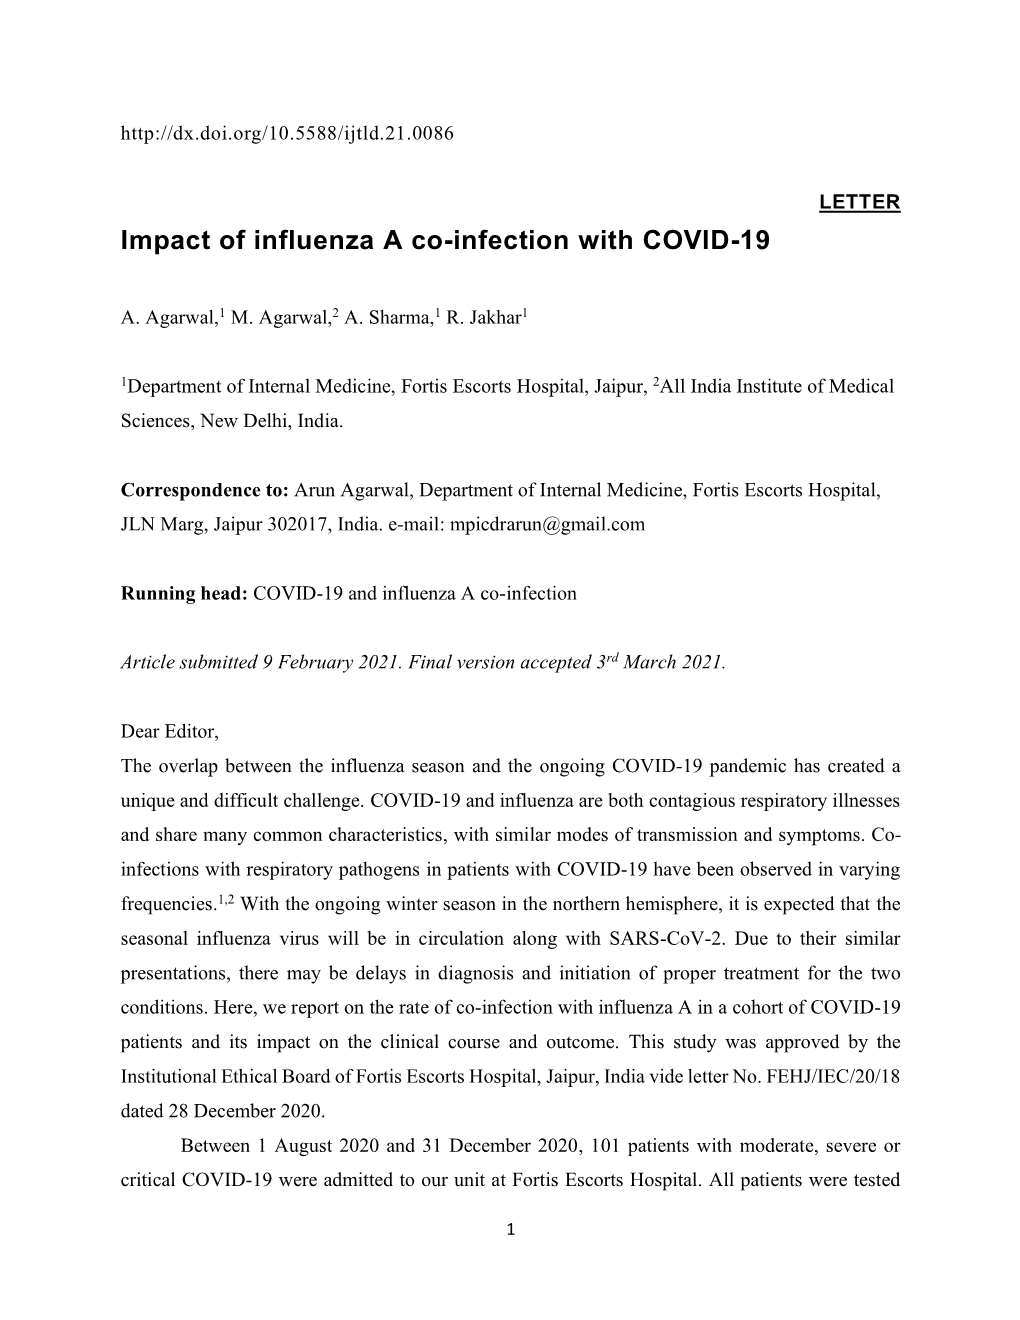 Impact of Influenza a Co-Infection with COVID-19